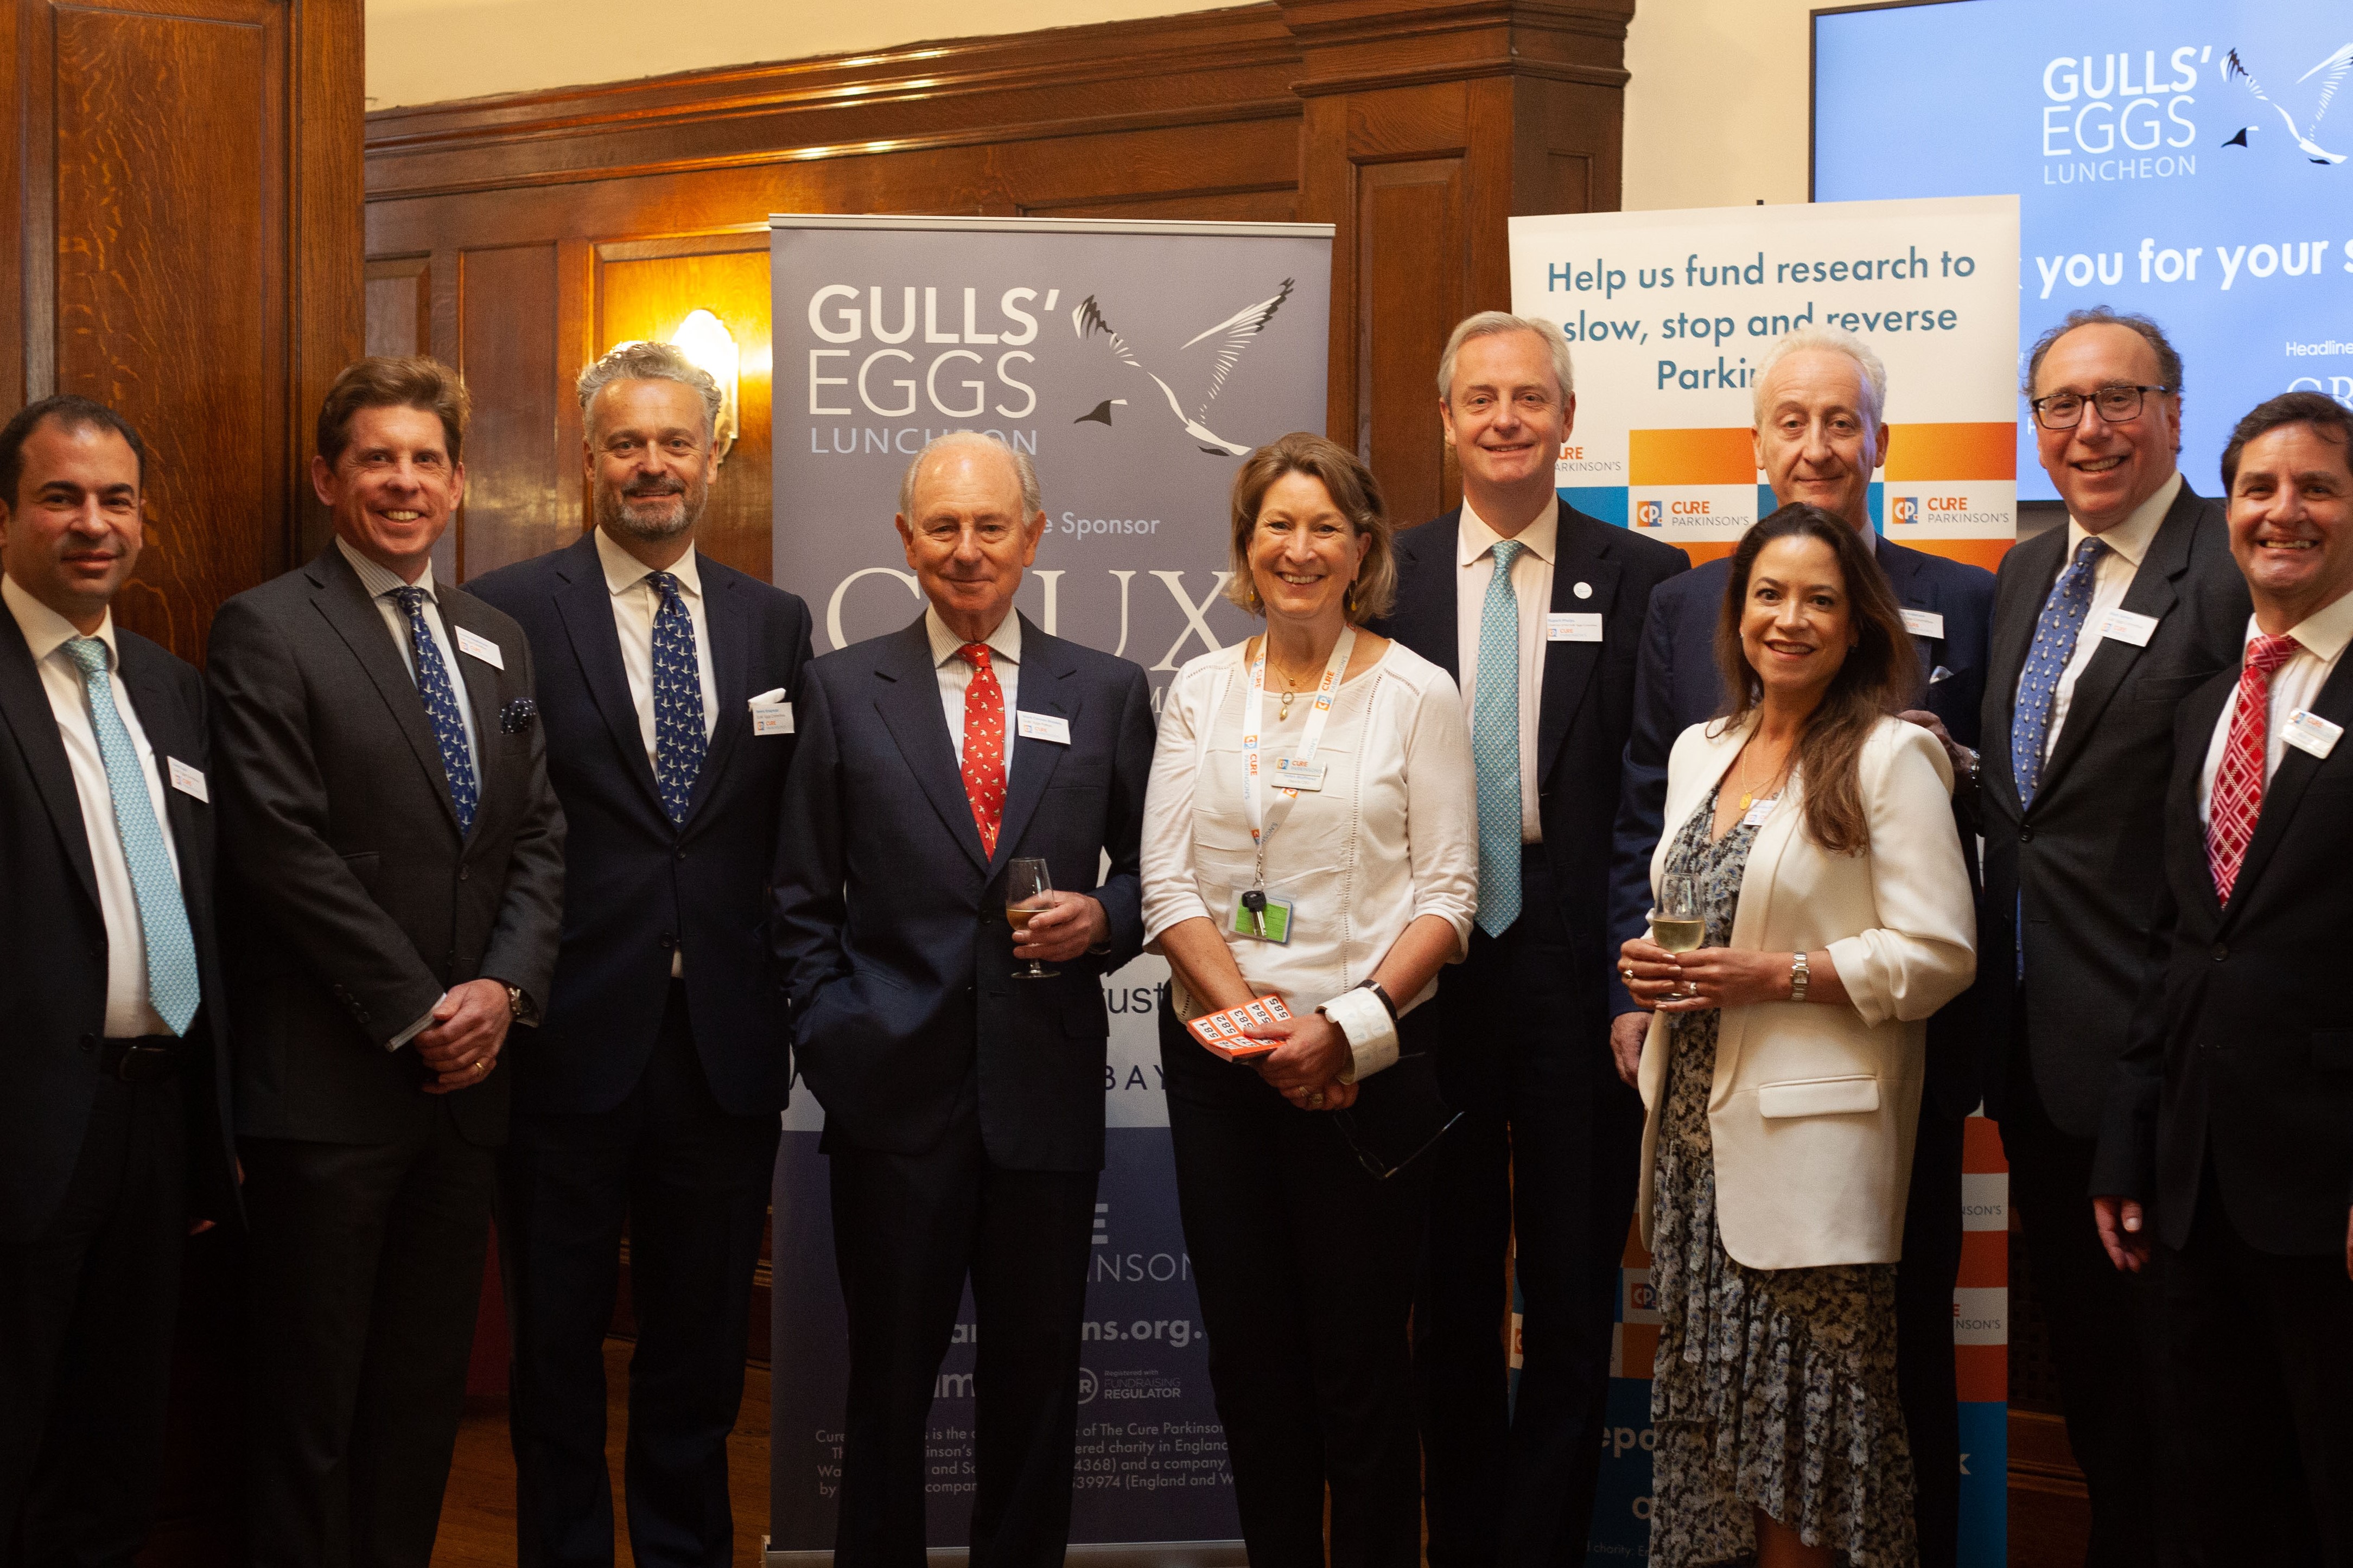 The 34th annual Gulls’ Eggs Luncheon raises over £90,000 for Parkinson’s research